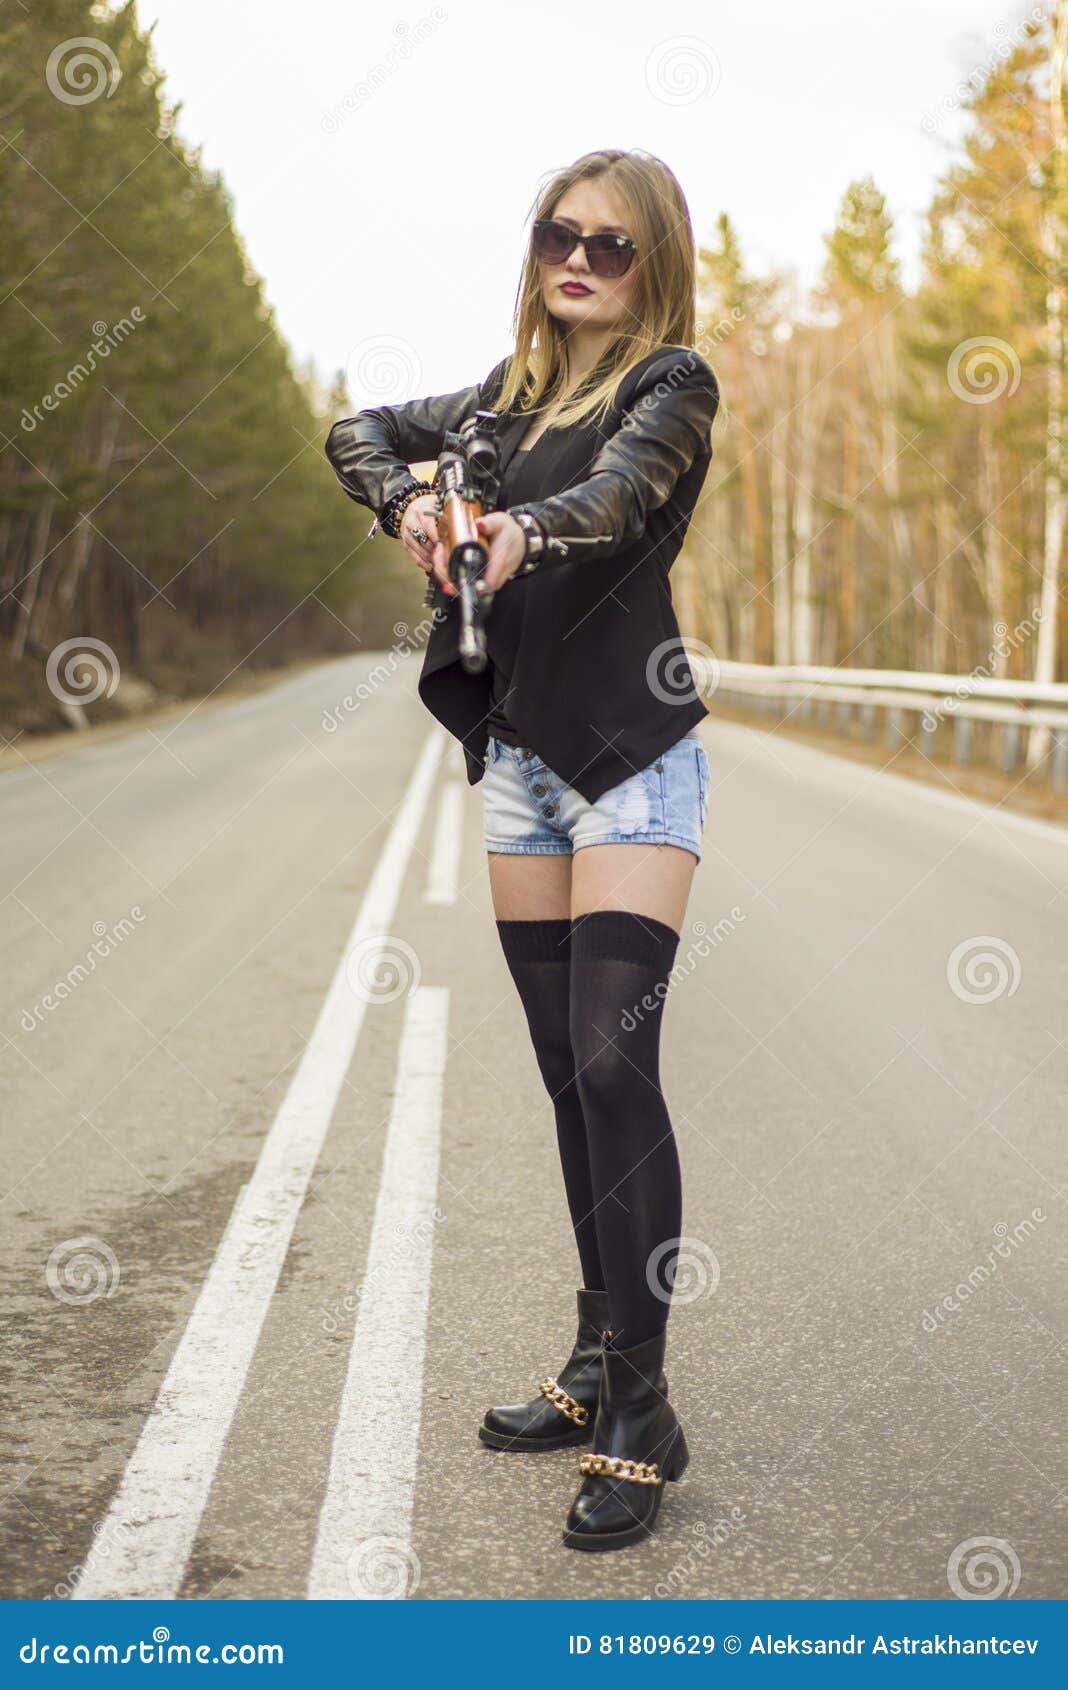 Girl Assassin Waiting for His Victim on the Road. Stock Image - Image ...